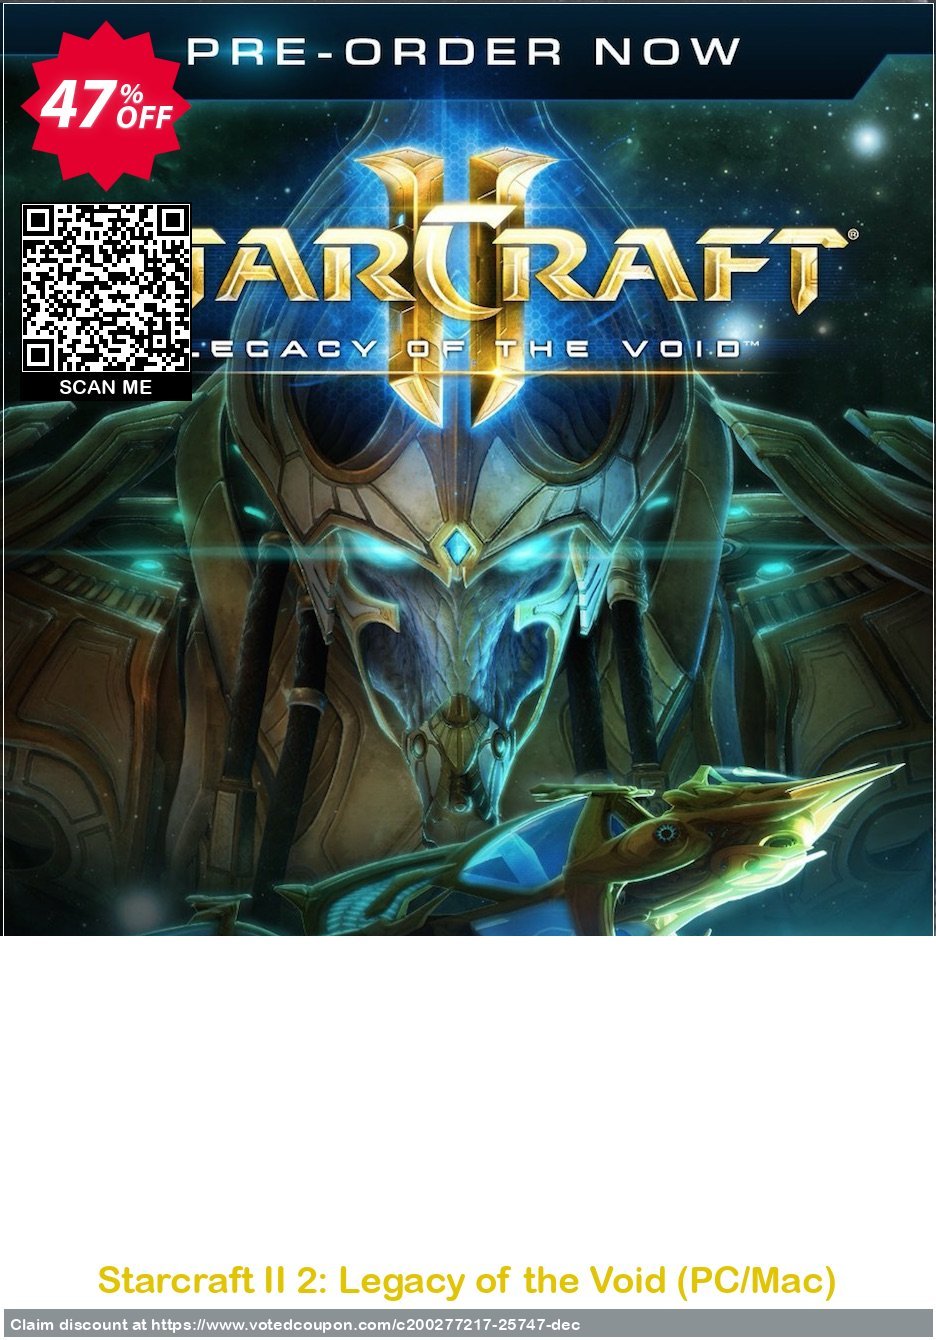 Starcraft II 2: Legacy of the Void, PC/MAC  Coupon, discount Starcraft II 2: Legacy of the Void (PC/Mac) Deal. Promotion: Starcraft II 2: Legacy of the Void (PC/Mac) Exclusive offer 